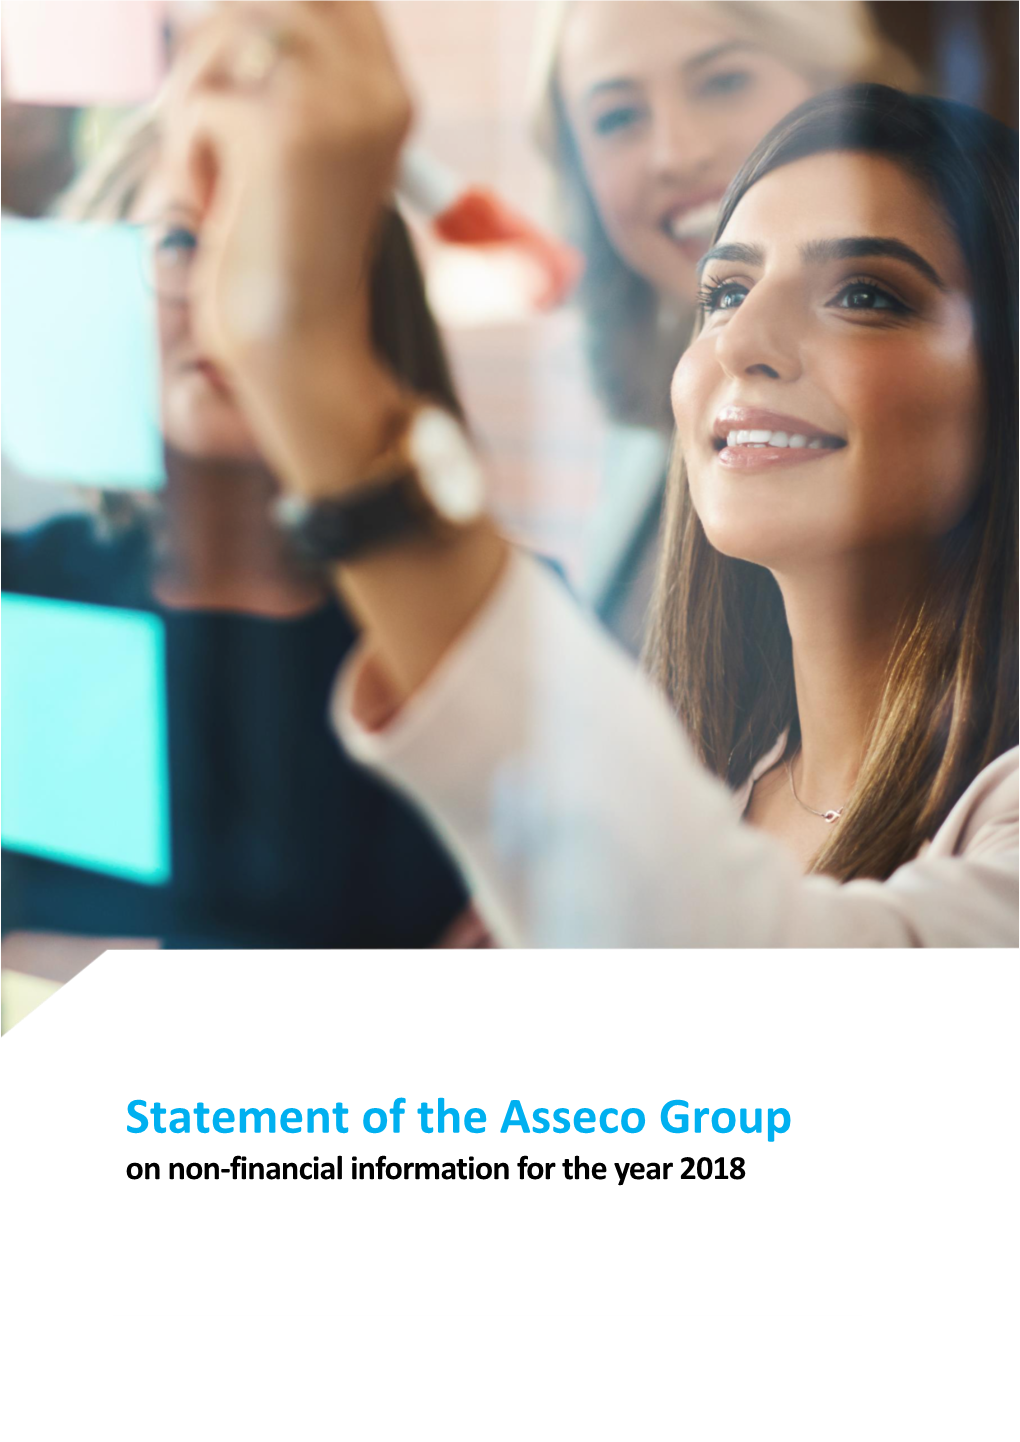 Statement of the Asseco Group on Non-Financial Information for 2018